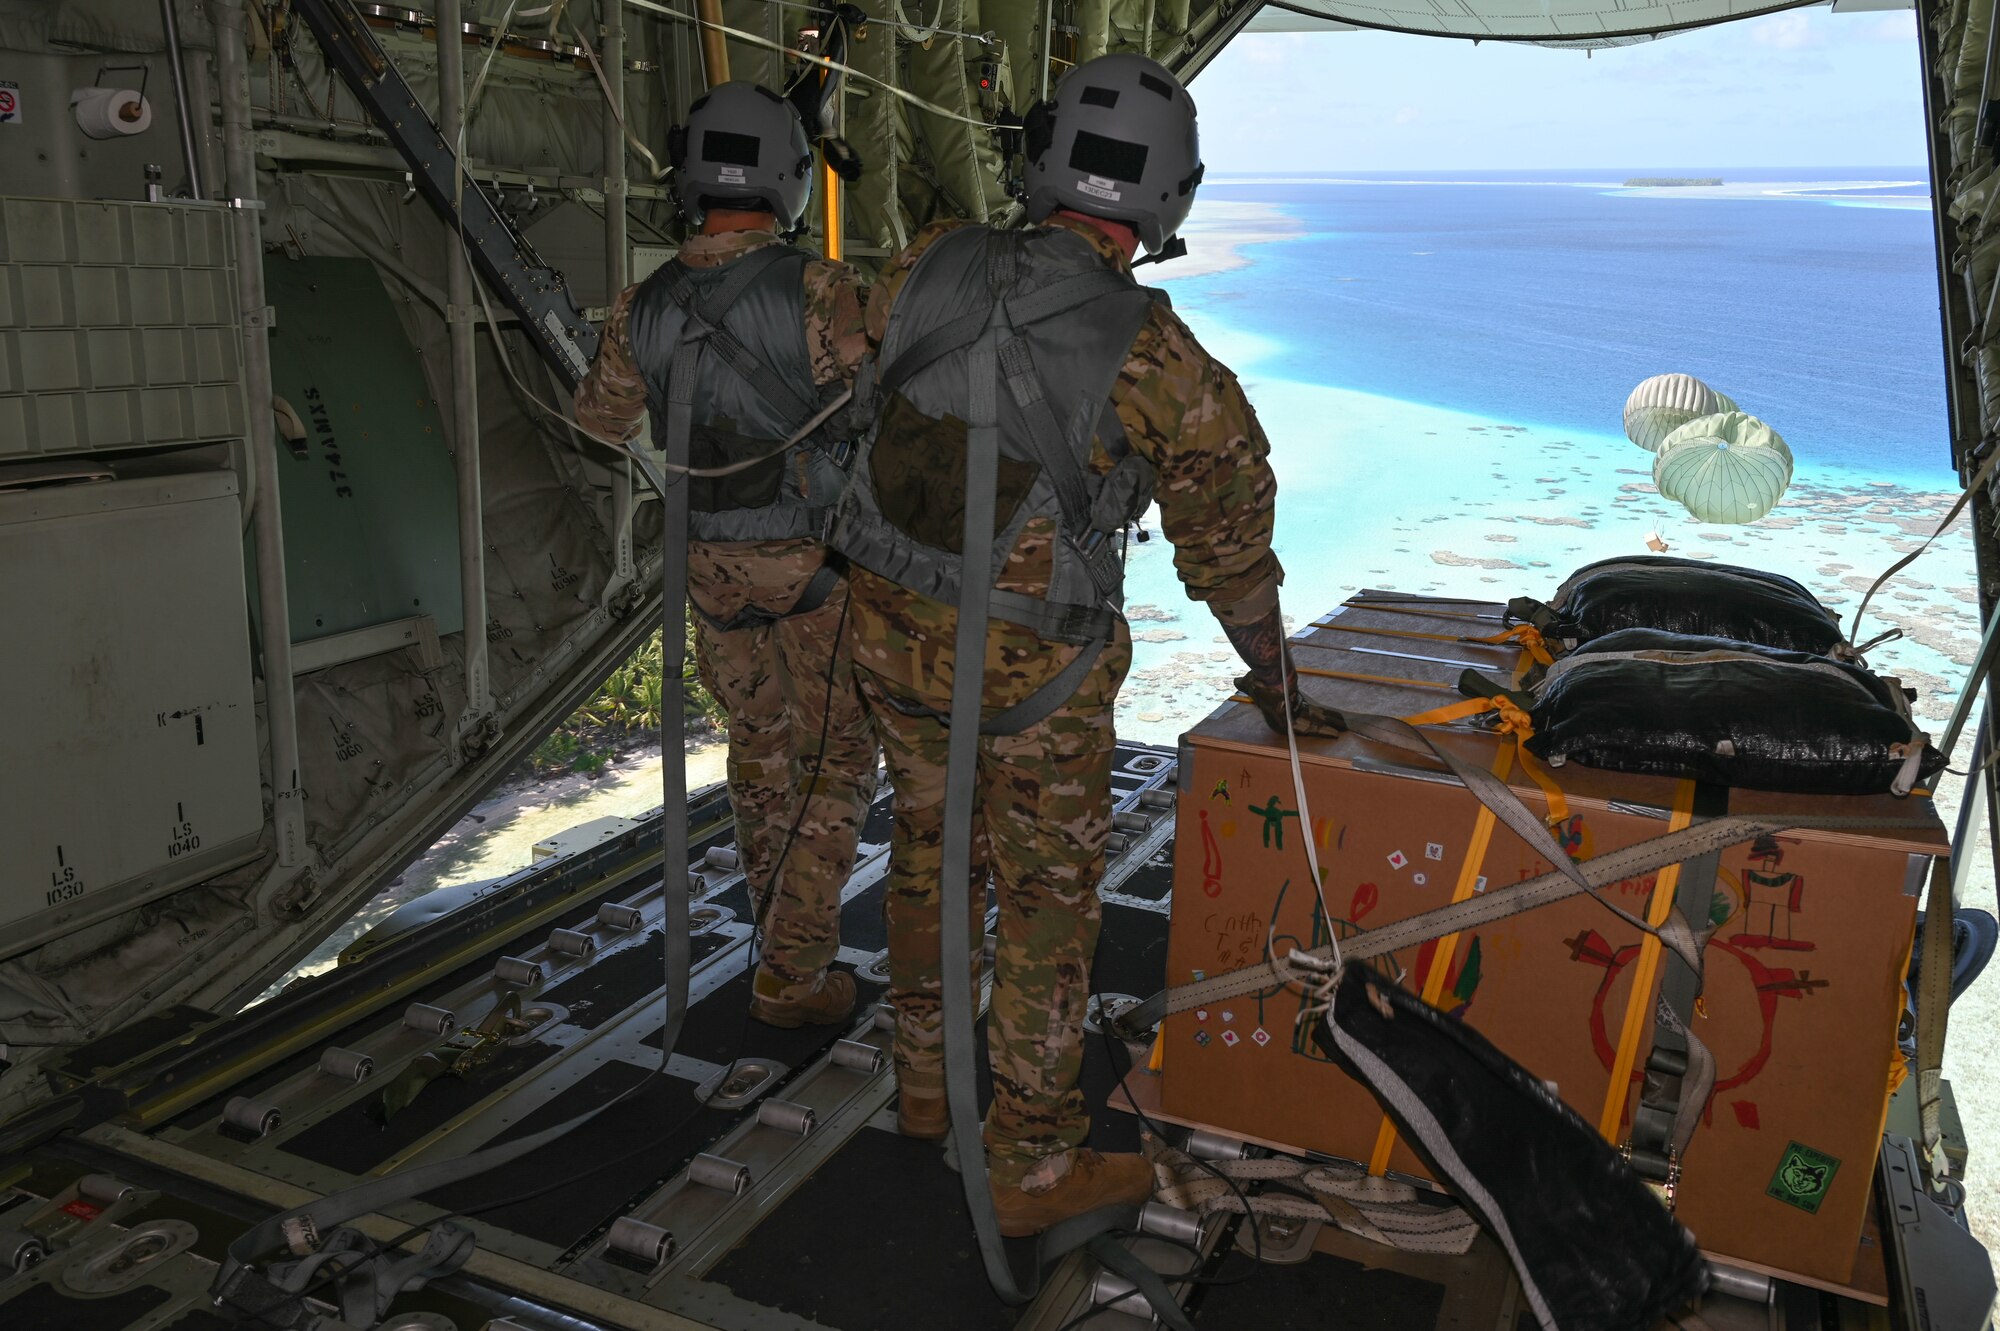 Two Airmen are on standing on an open ramp of a C-130J Hercules and watching bundles of humanitarian aid drop (with parachutes) to the island of Eauripik.